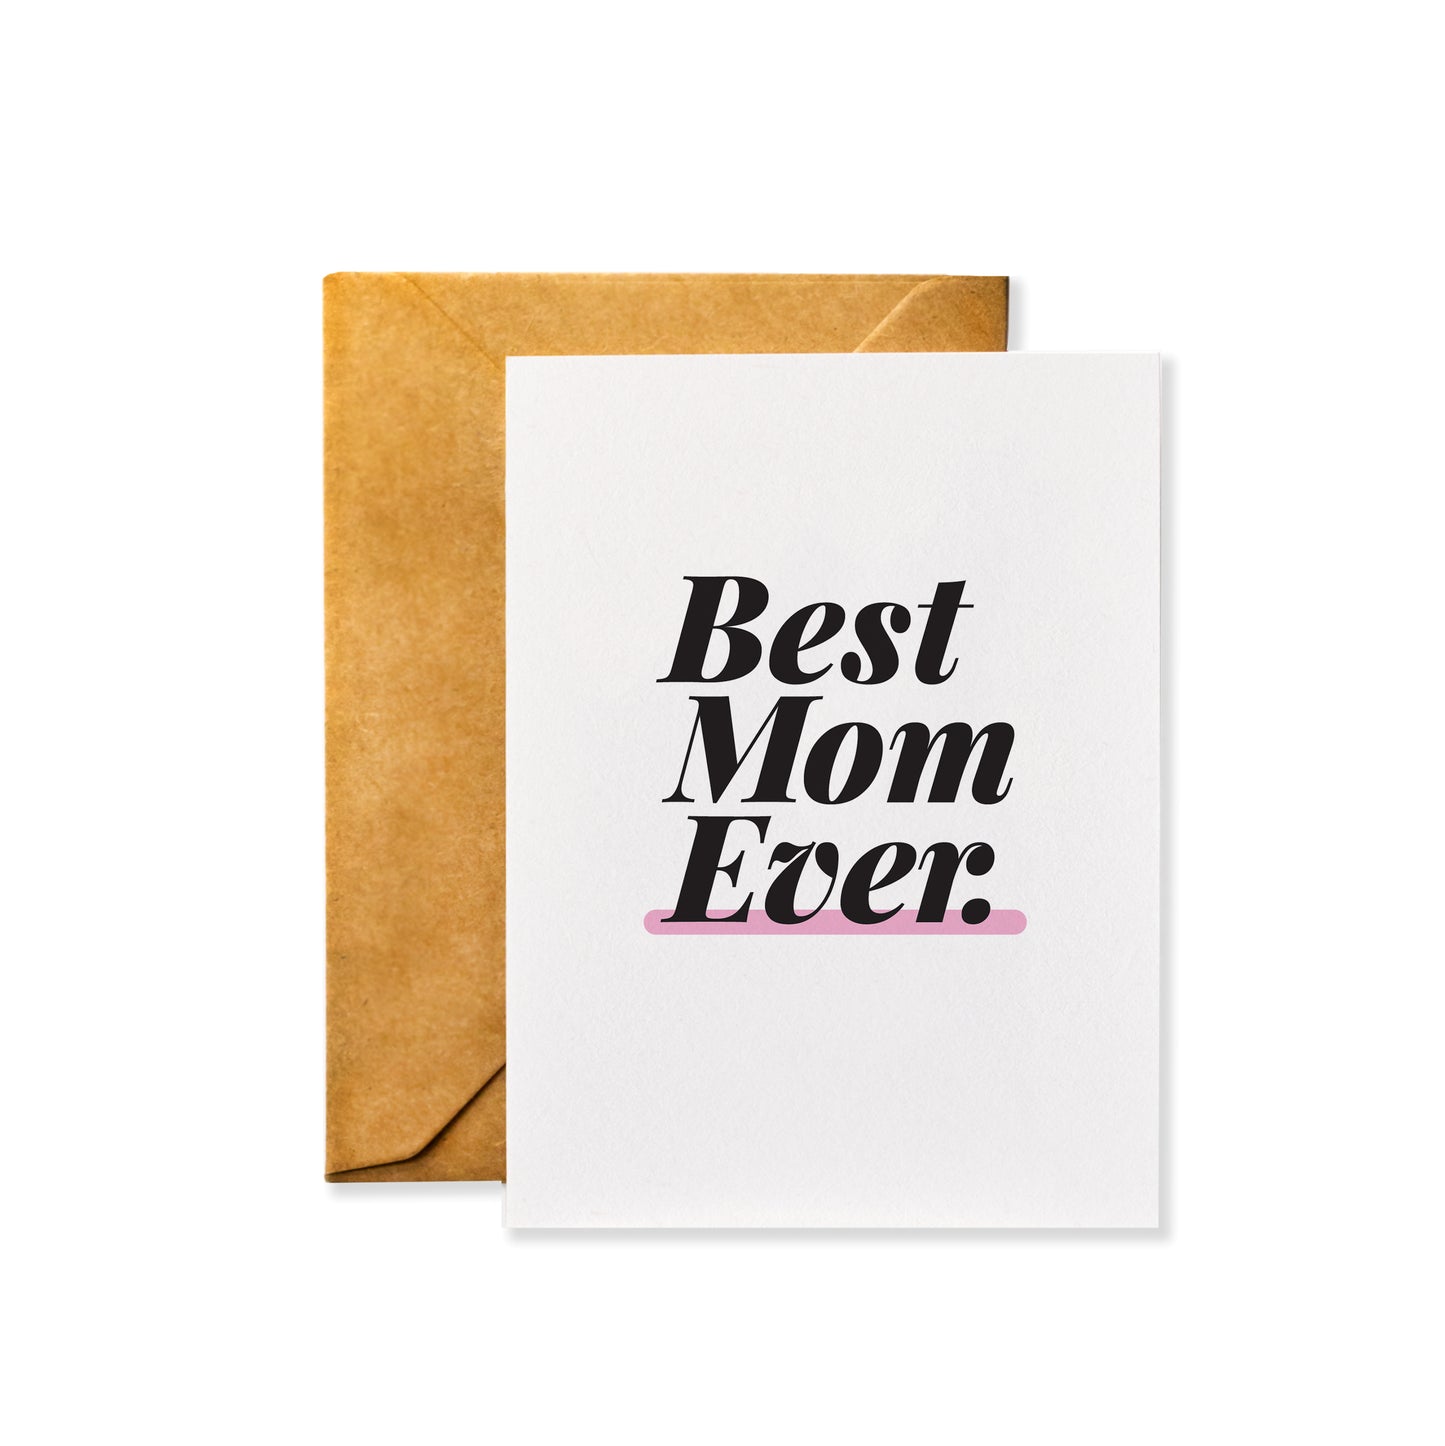 Best Mom Ever | Mother's Day Greeting Card